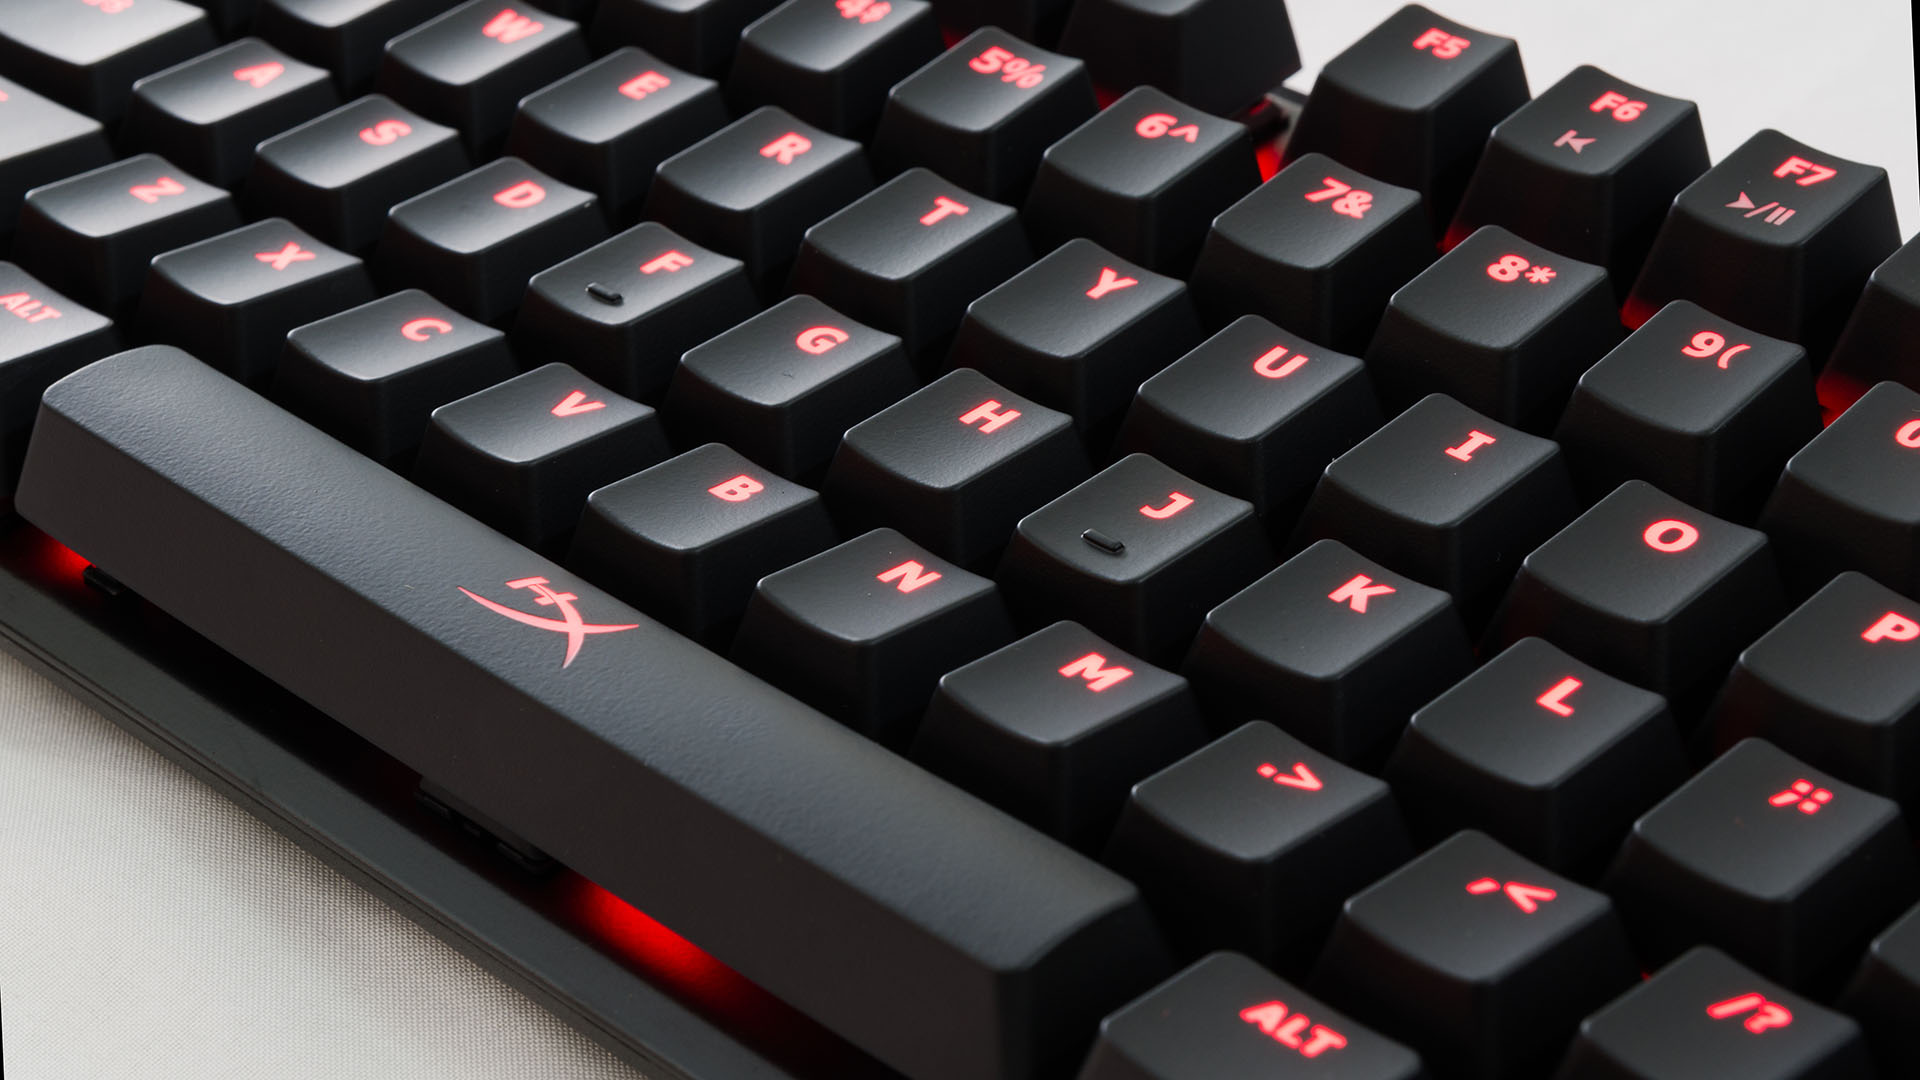 keyboard wallpaper,computer keyboard,red,electronic device,technology,input device